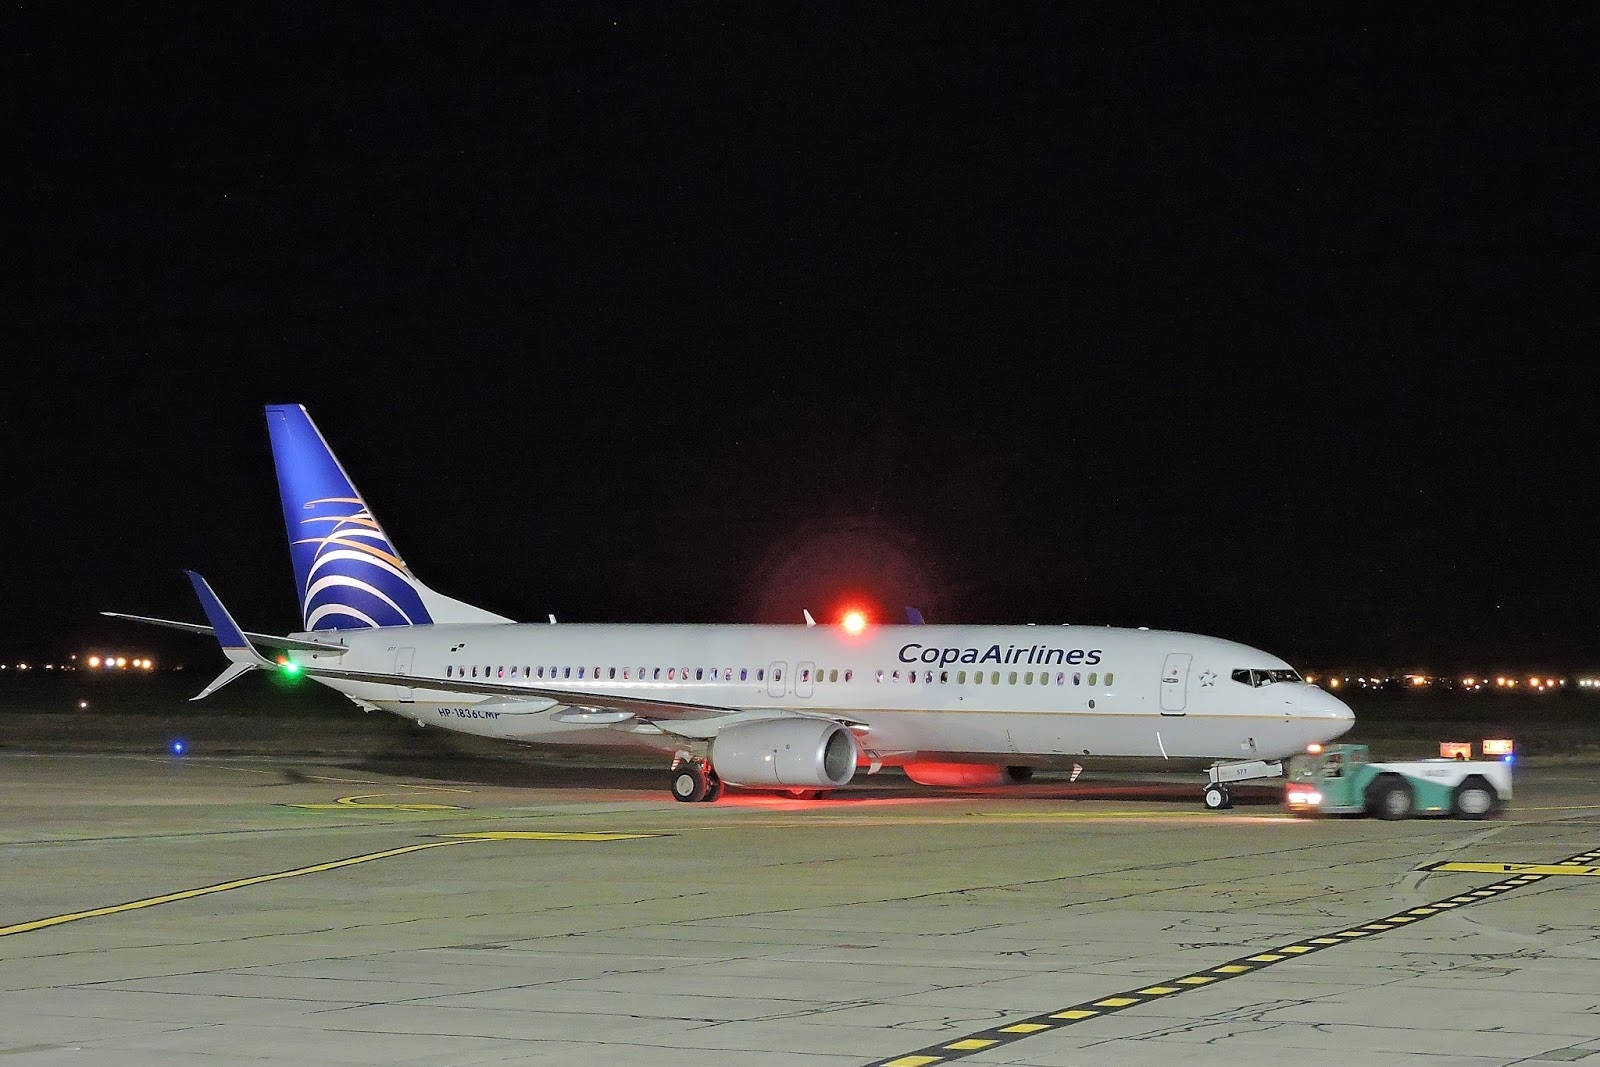 A Copa Airlines plane ready for takeoff at Tocumen Airport. Wallpaper